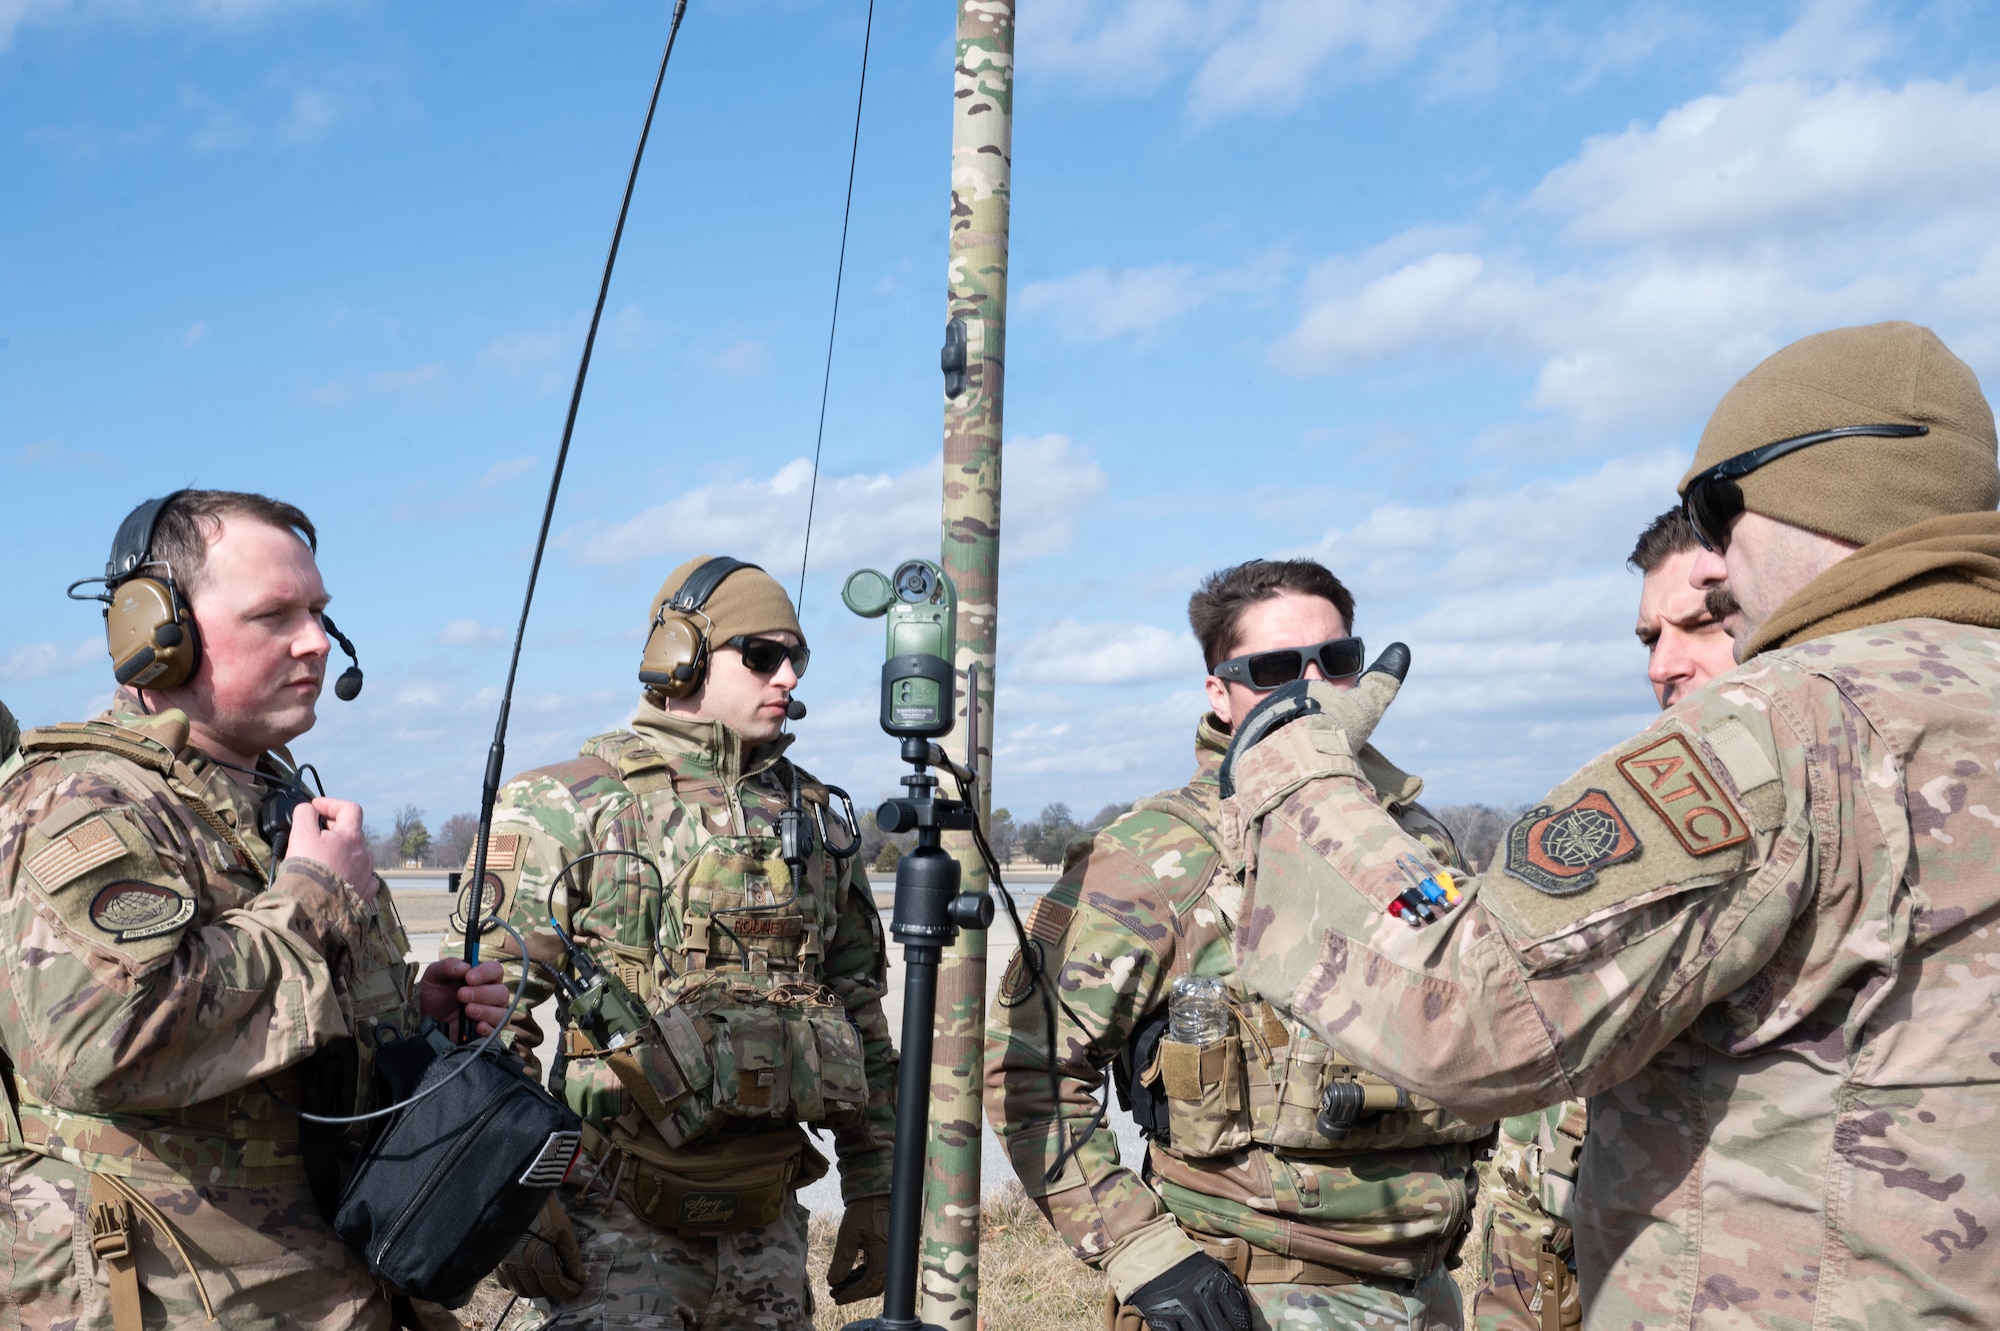 TSgt. Marple stands with four other Airmen, who are circled around a wind sensor